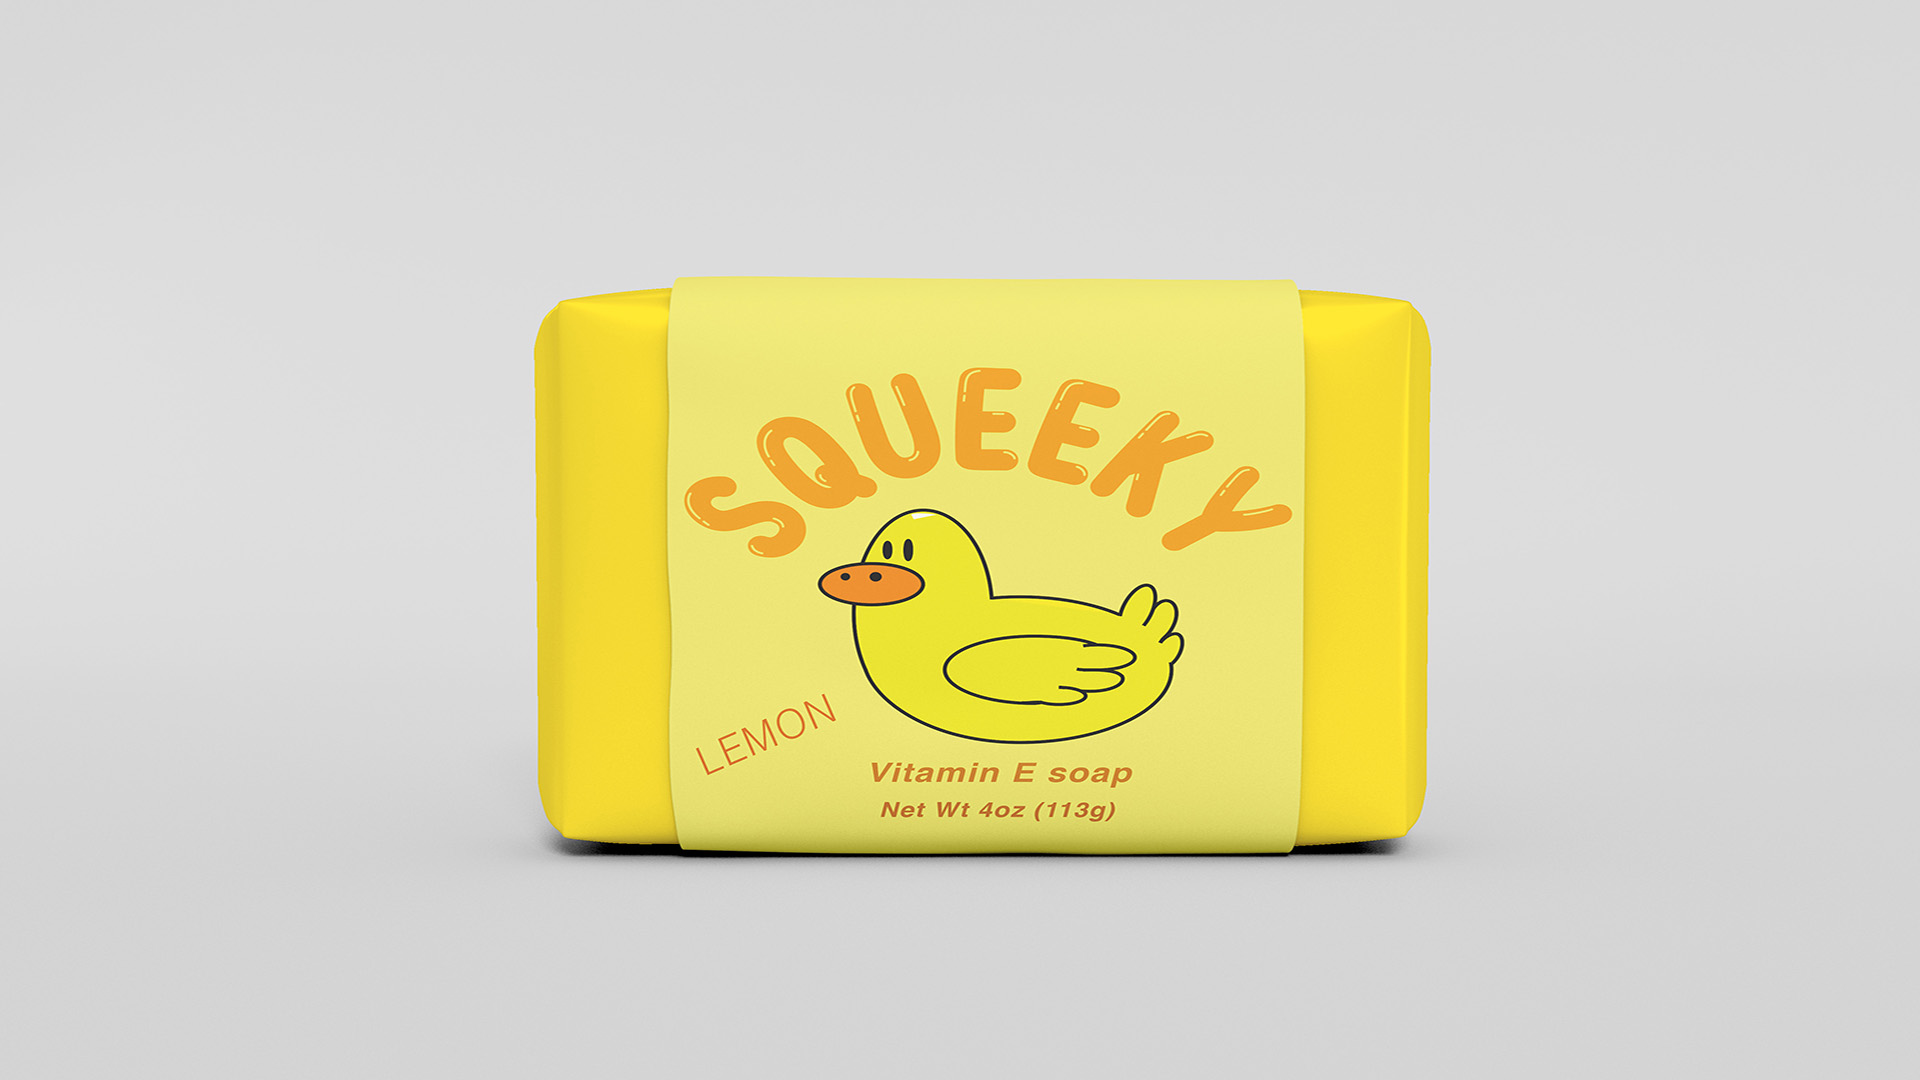 Squeeky / This is a kids soap brand I designed and packaged 